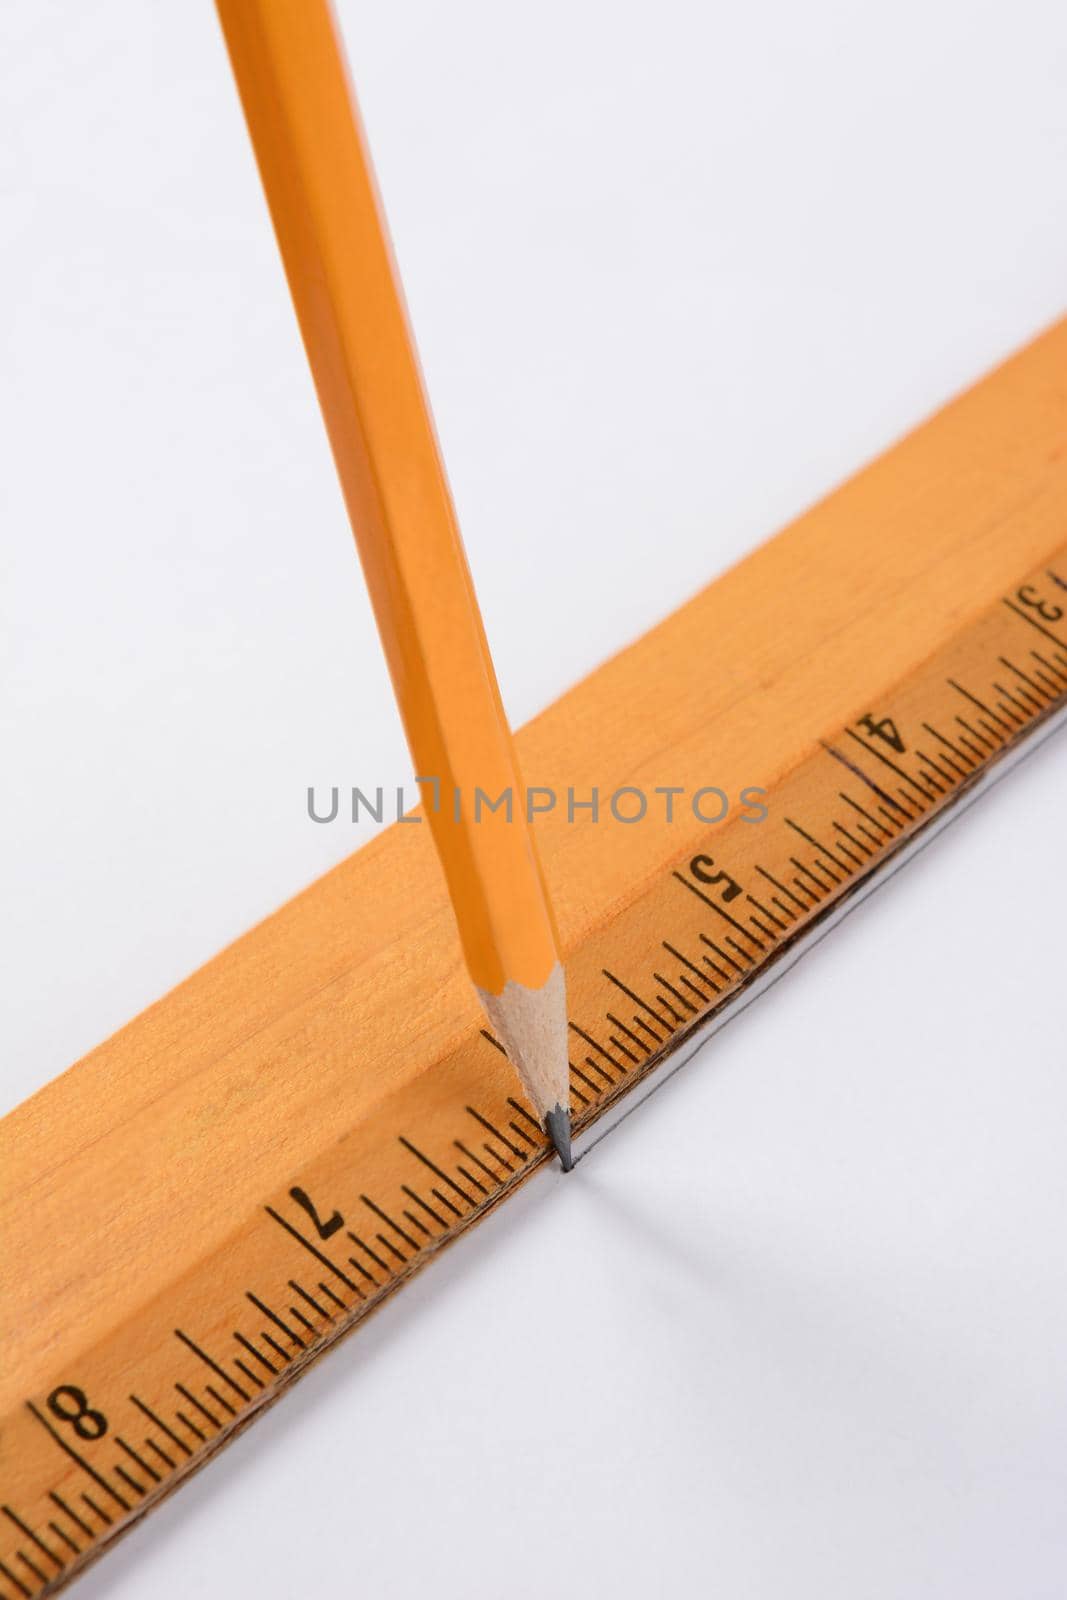 Pencil and Ruler by sCukrov